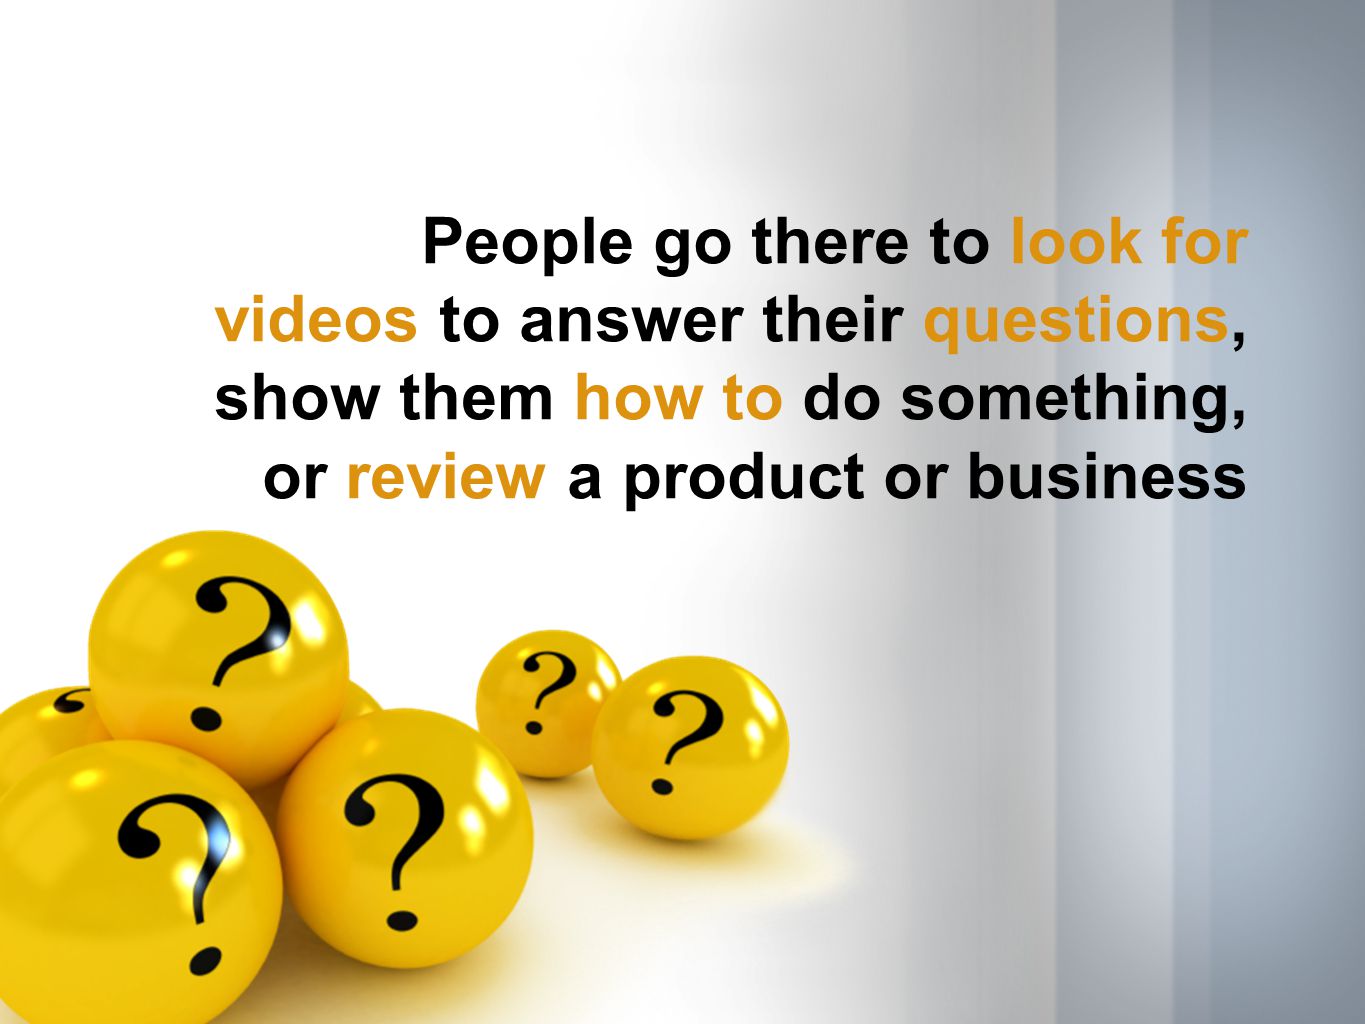 People go there to look for videos to answer their questions, show them how to do something, or review a product or business